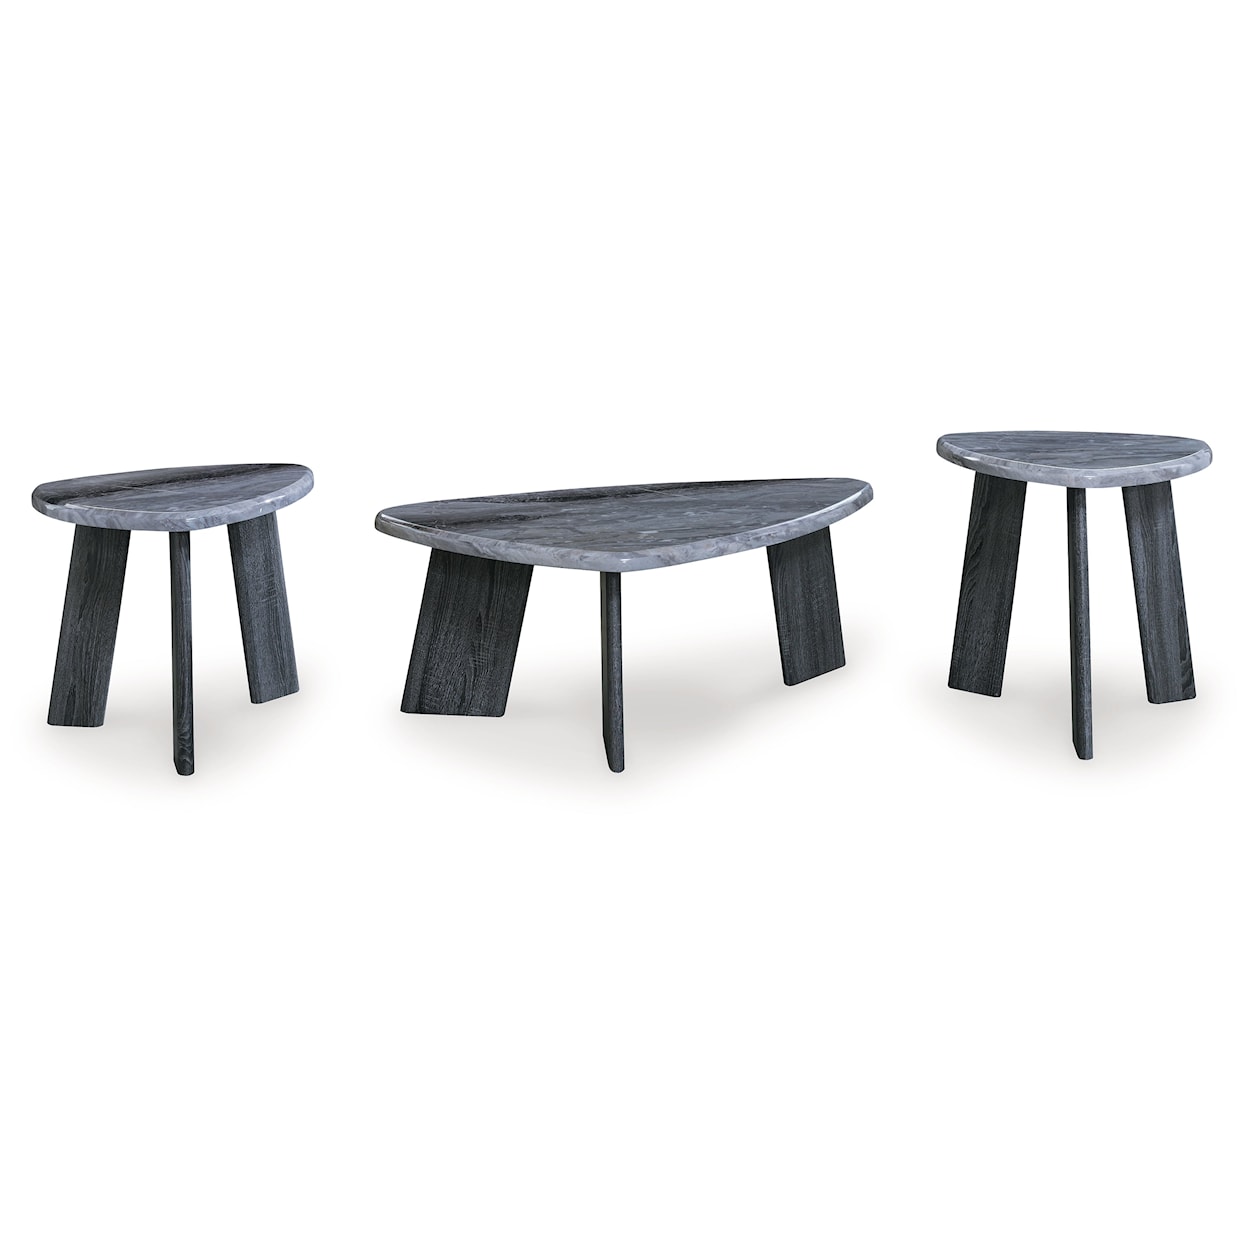 Benchcraft Bluebond Occasional Table (Set of 3)